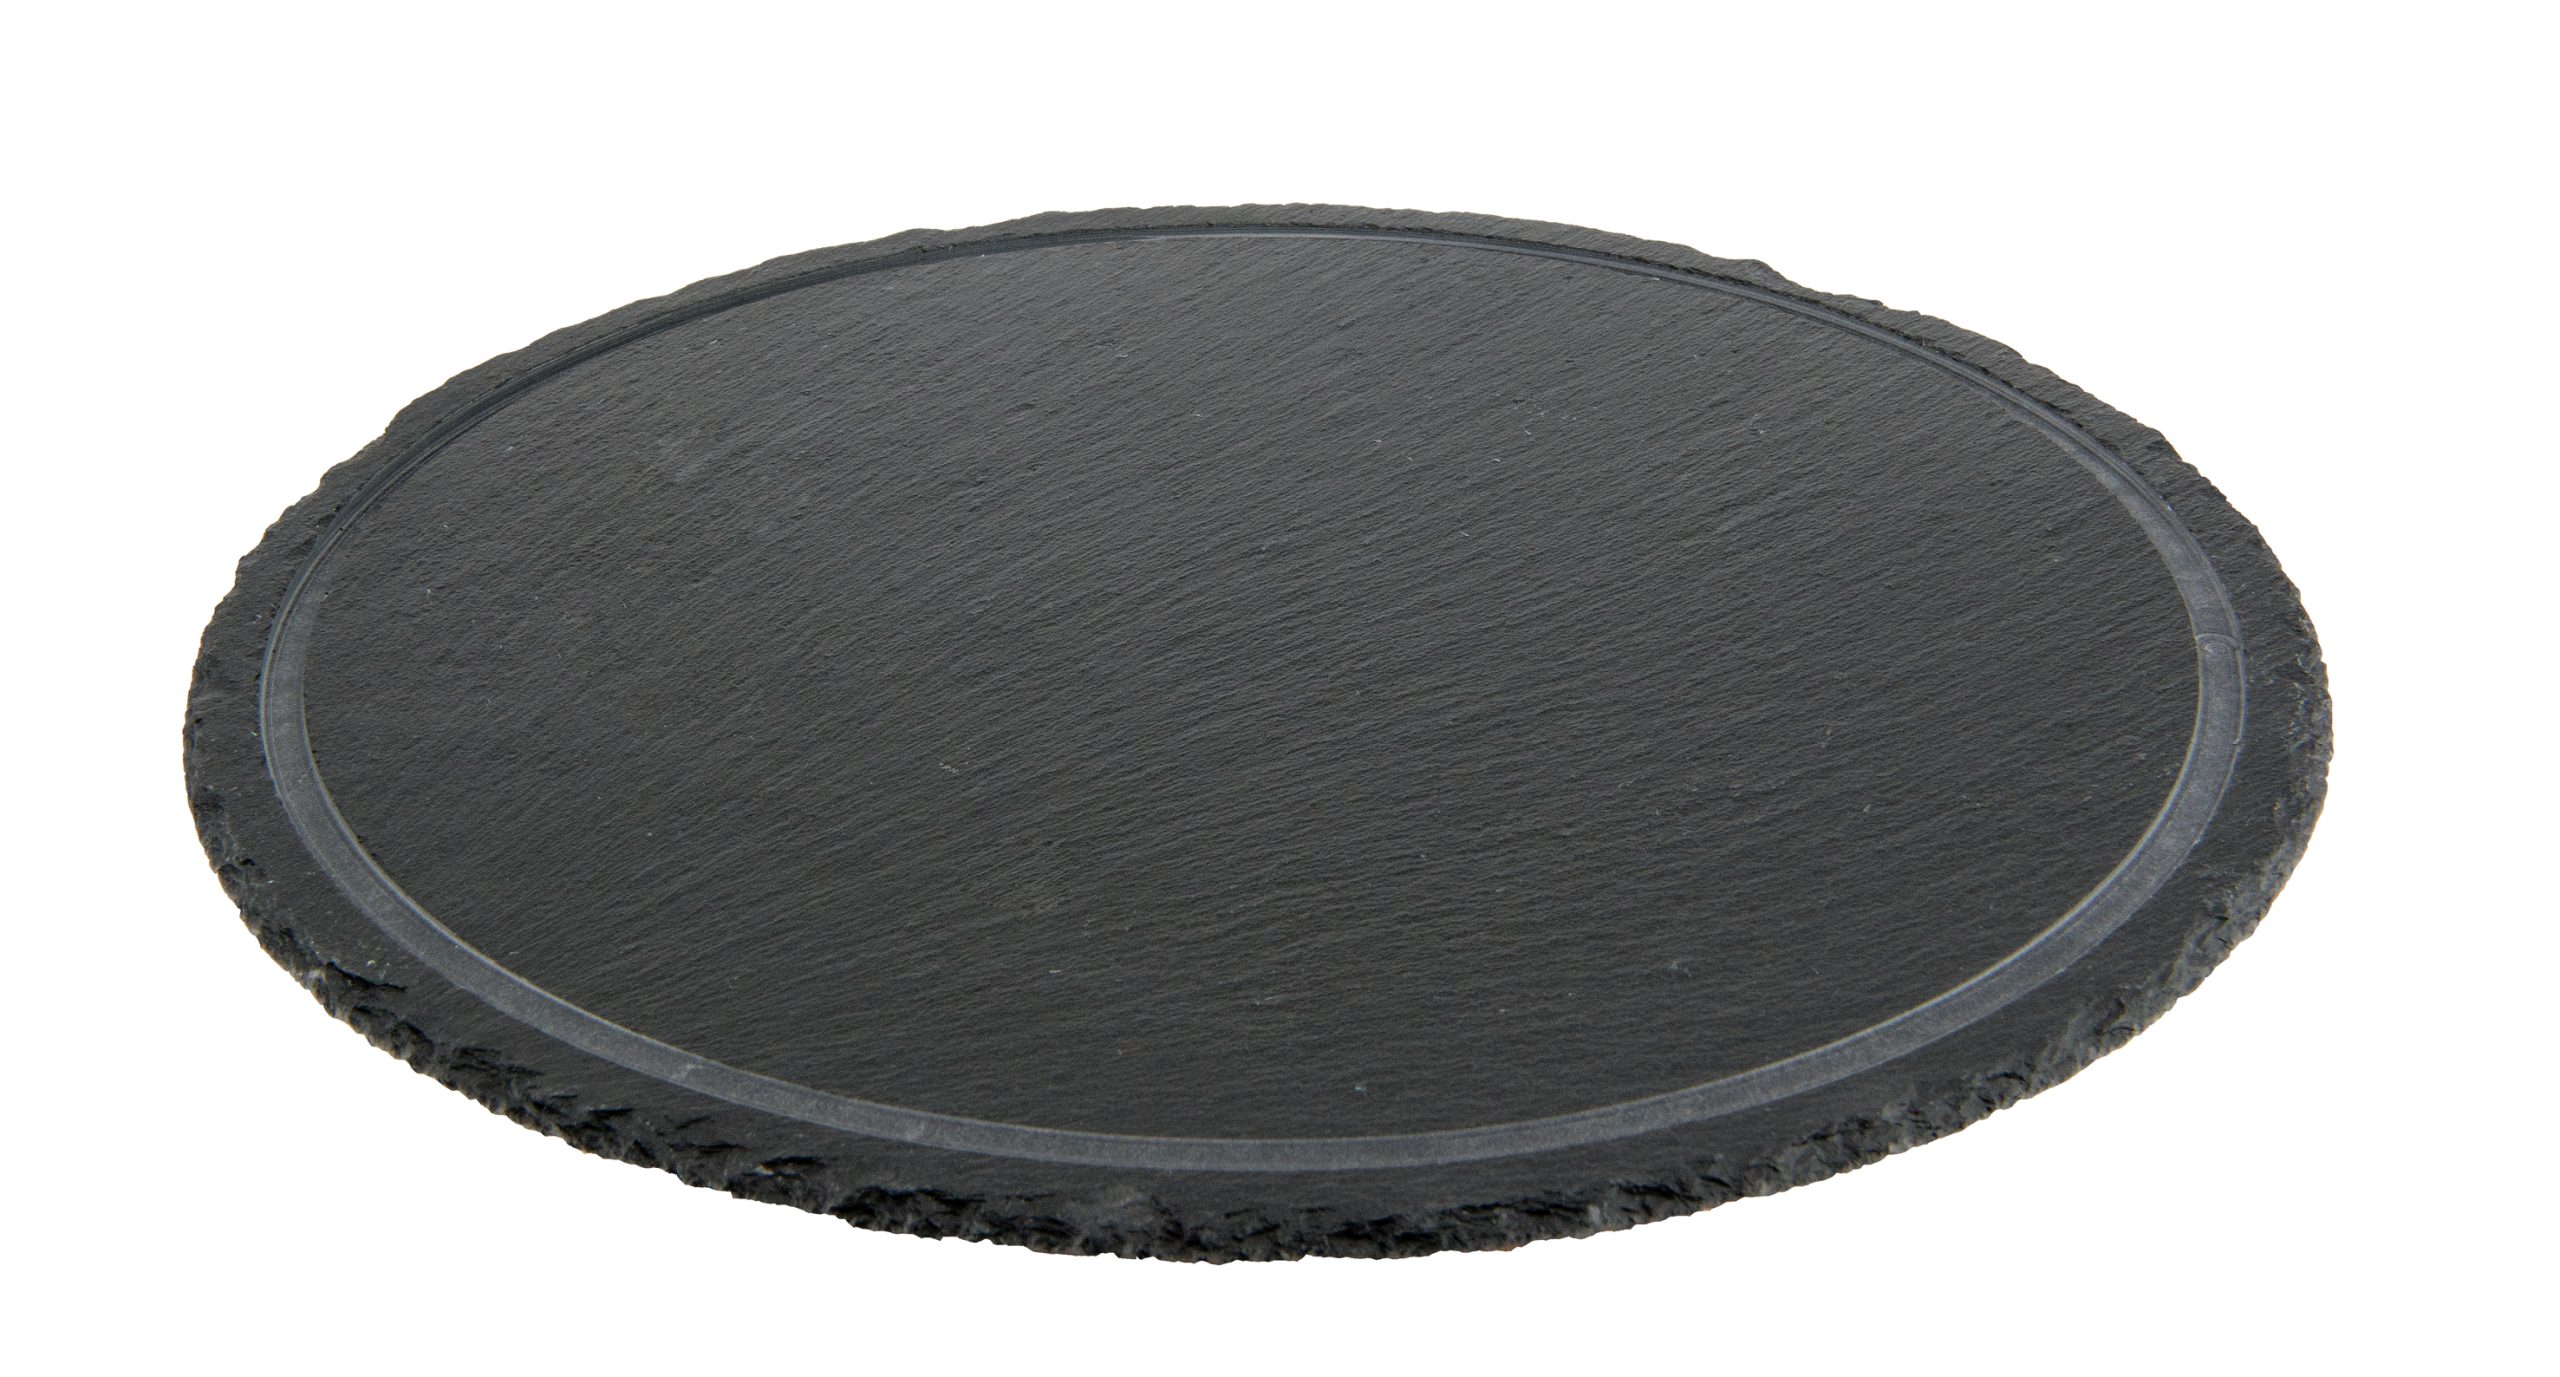 ROUND NATURAL SLATE TRAY WITH GROOVE  33cm  ILSA Italy